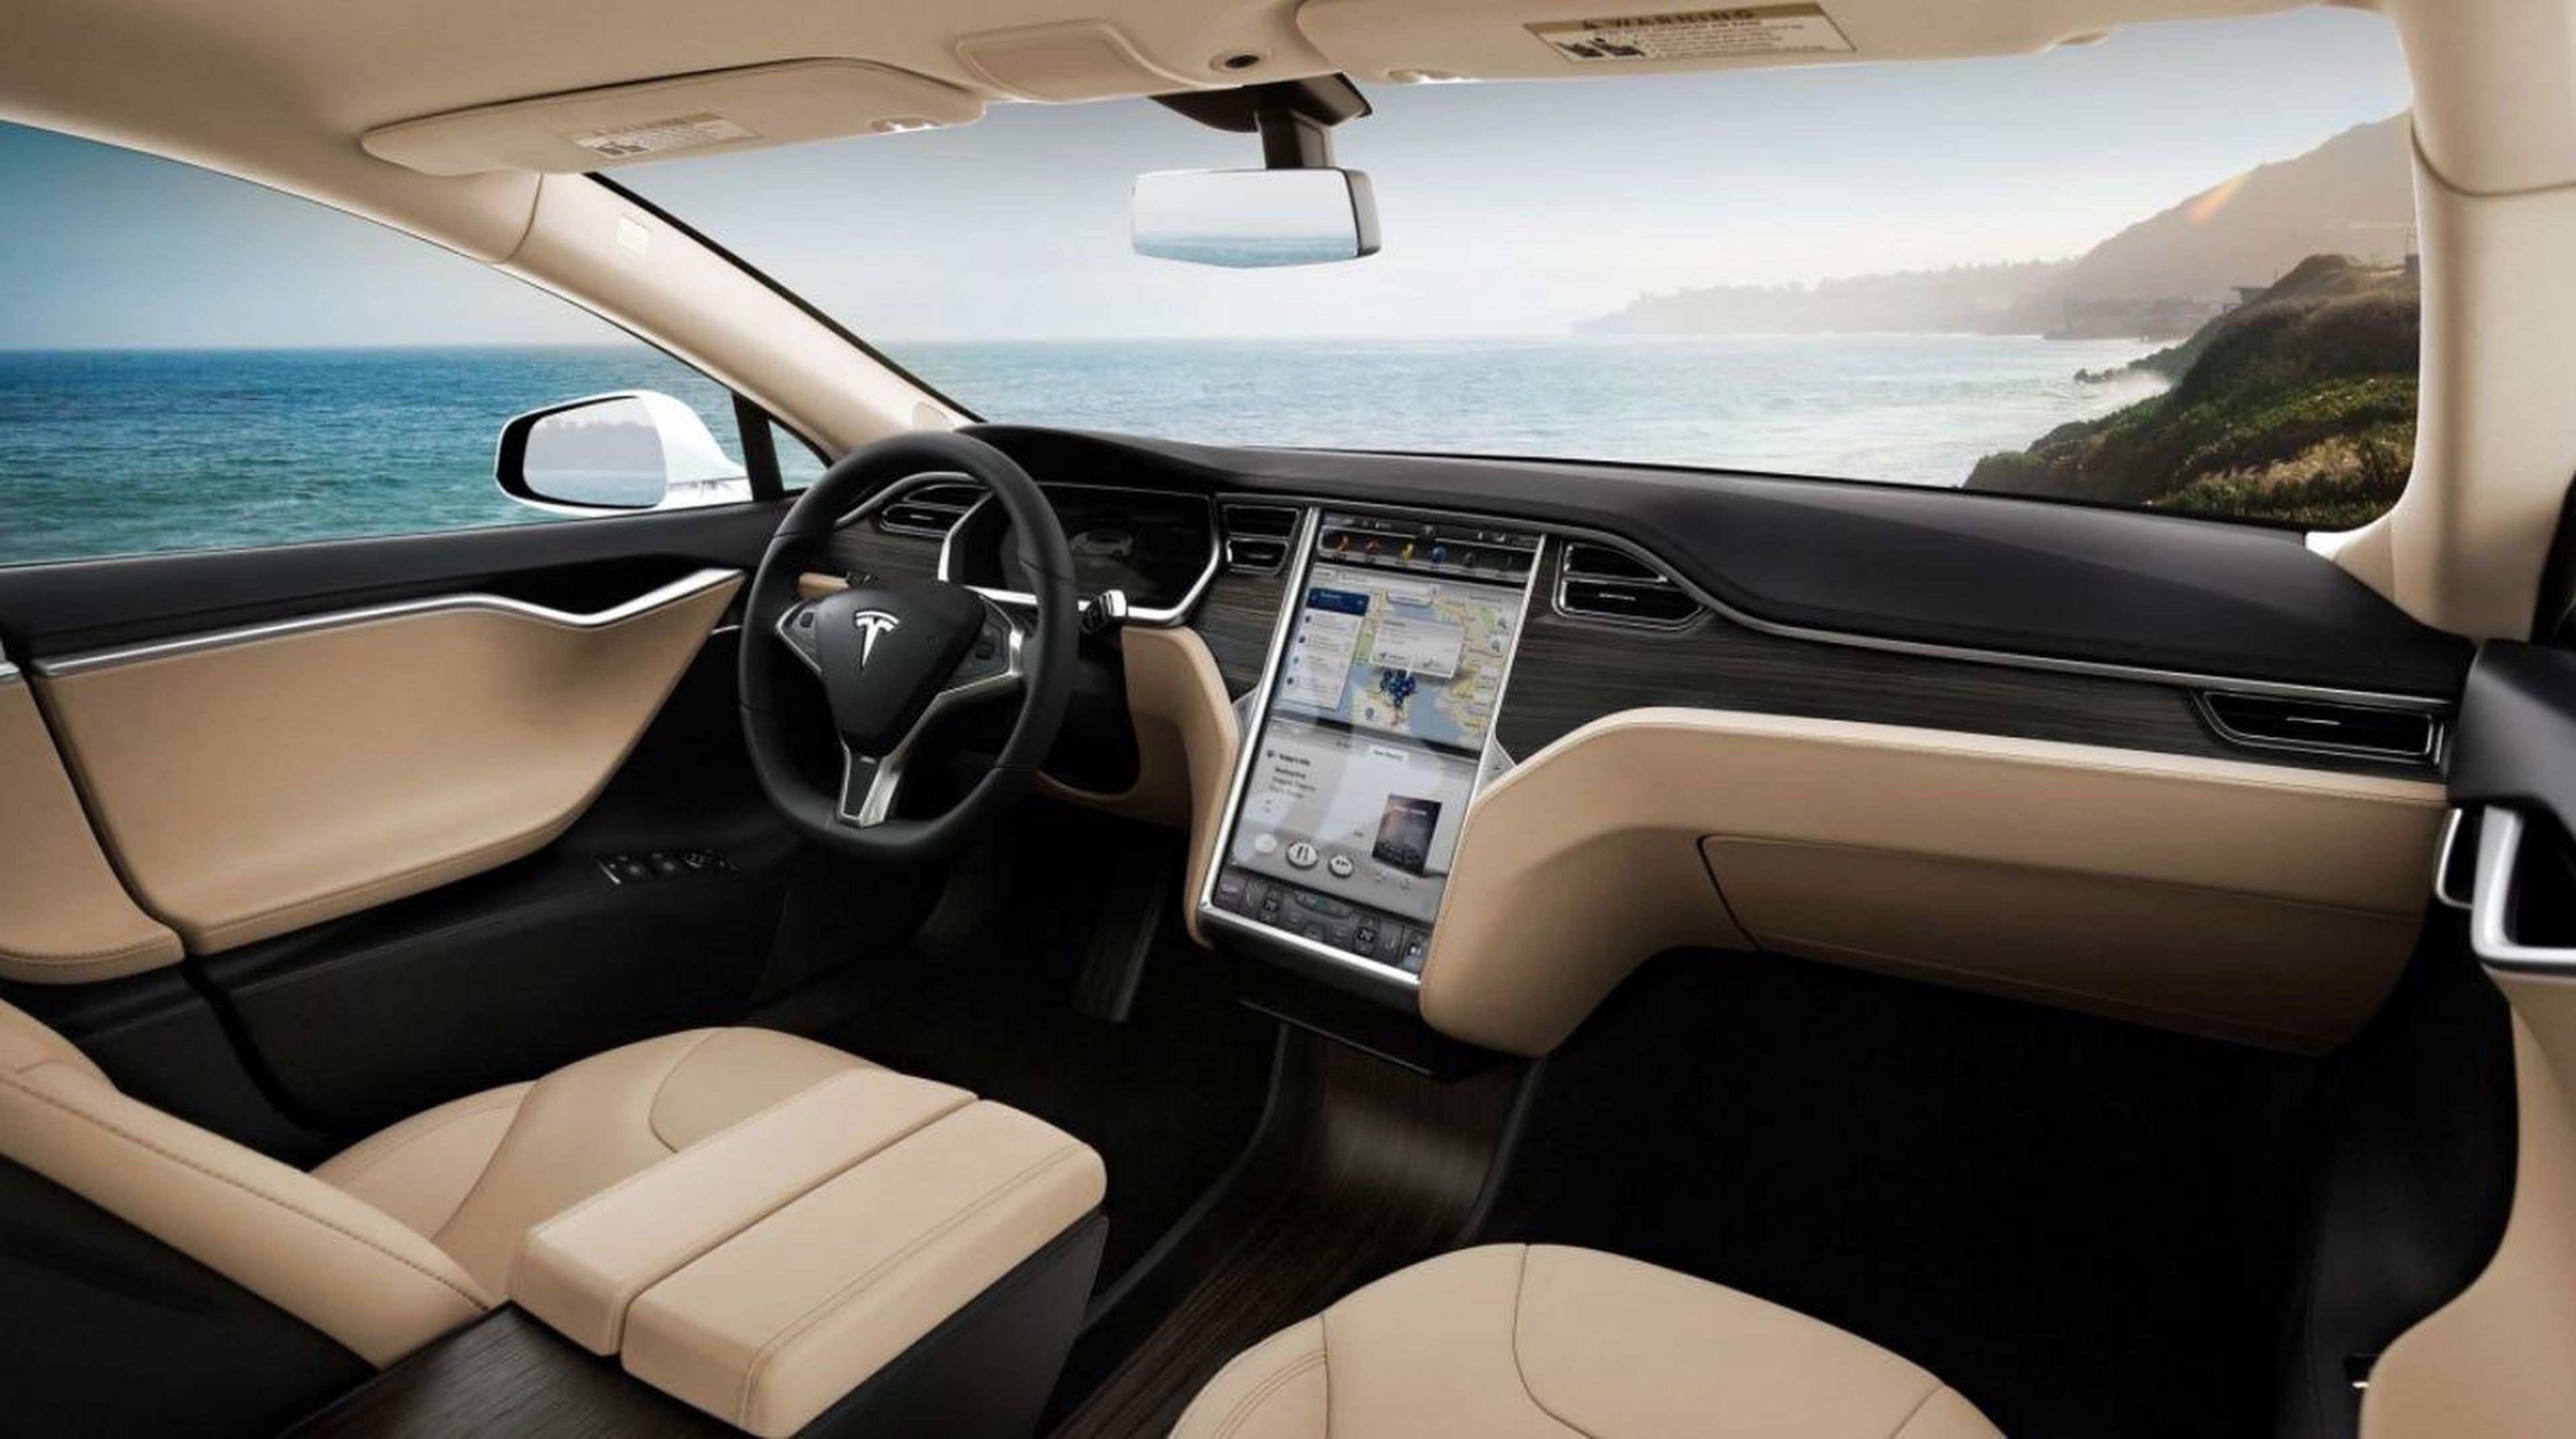 The Model S interior comes in basic black standard, regardless of trim. A few different interior options are on offer, for an extra $1,500. Exterior colors that aren't black also add $1,000, on up to "red multi-coat," which is $2